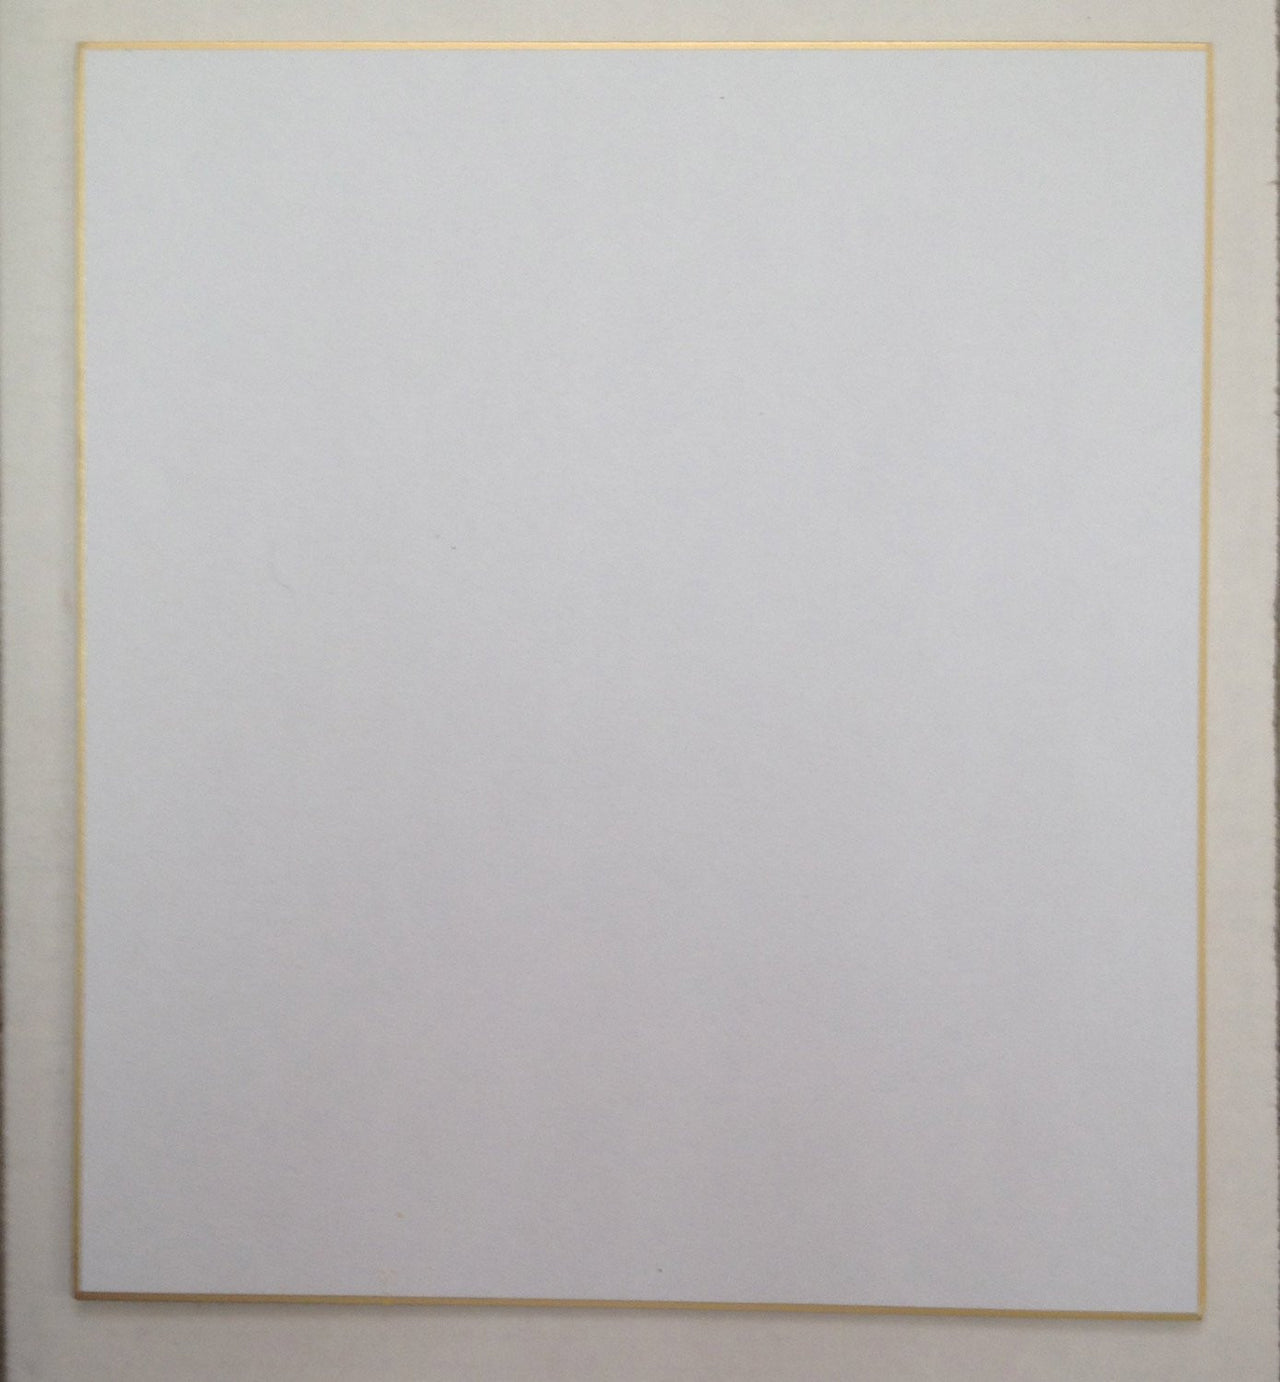 Japan Art Shikishi Board 9.5 x 10.75" Gold Bordered for Japanese Art or Calligraphy (Pack of 50) - The Japan Shop